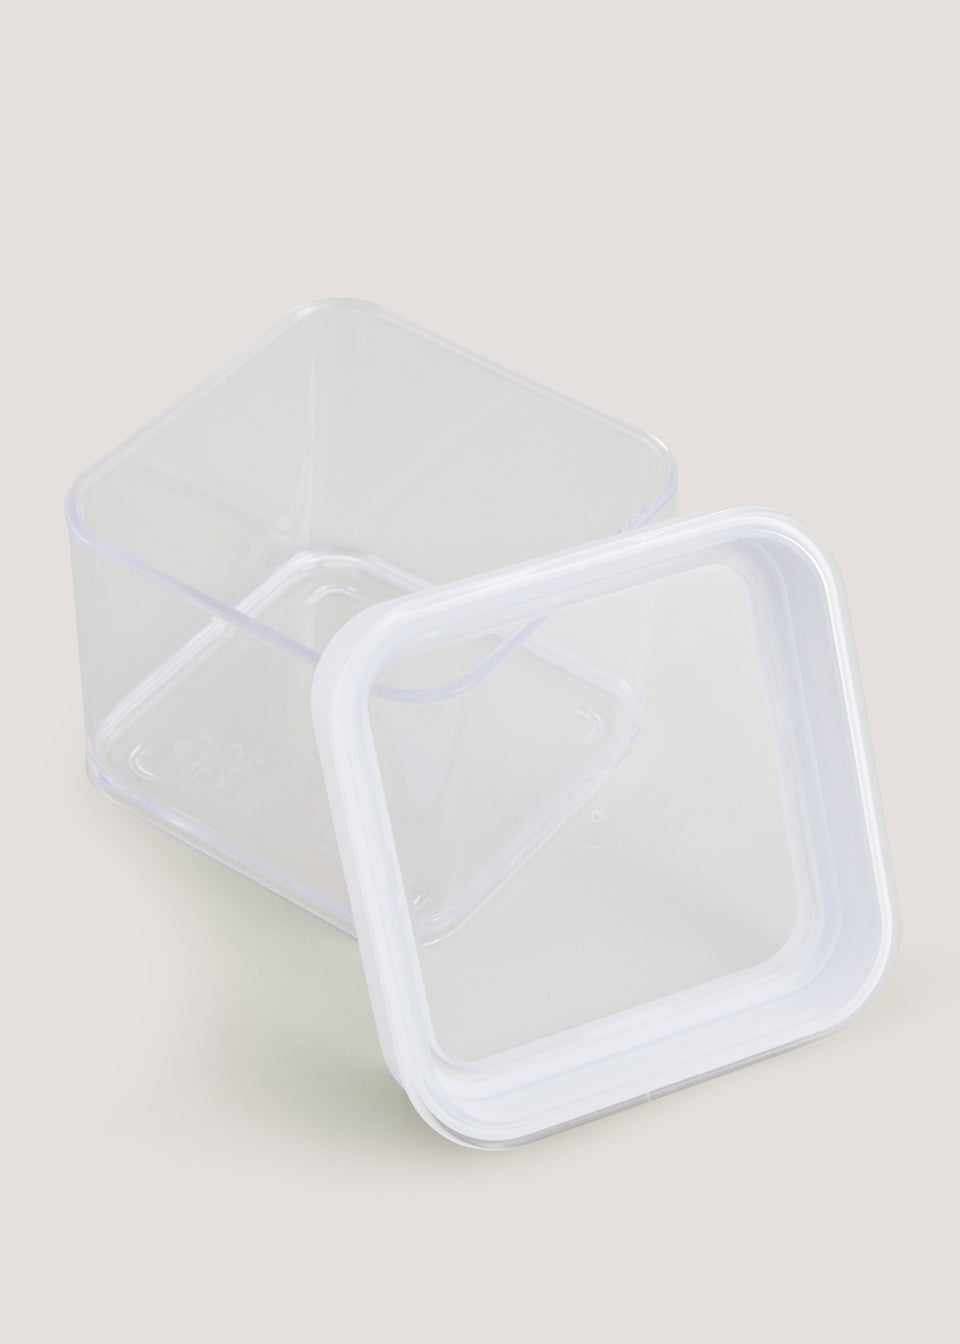 Clear Lid Stackable Food Storage (0.5L)